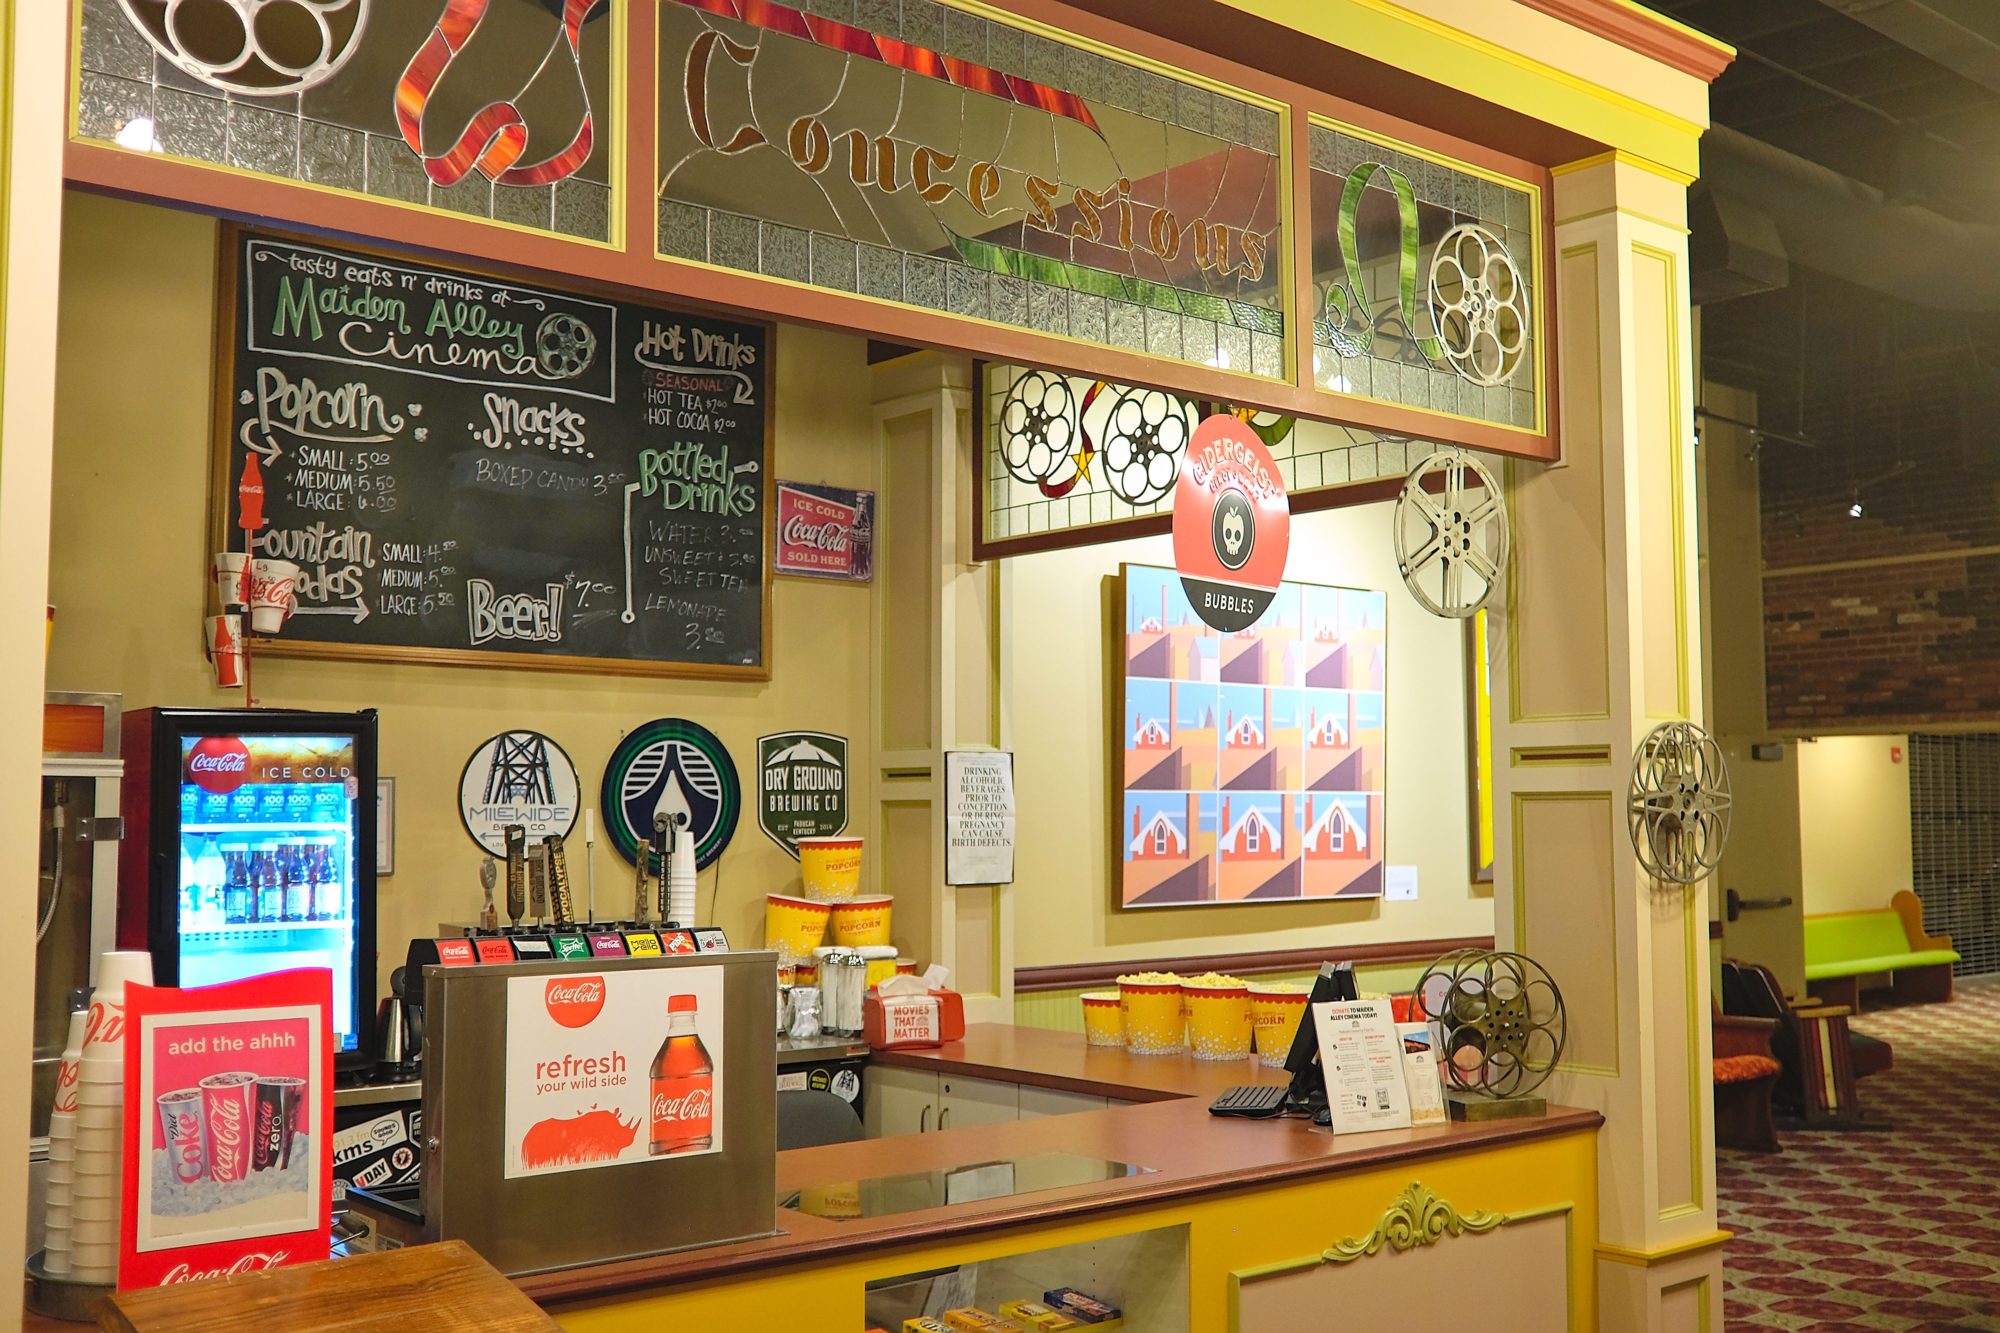 The concession stand at Maiden Alley Cinema